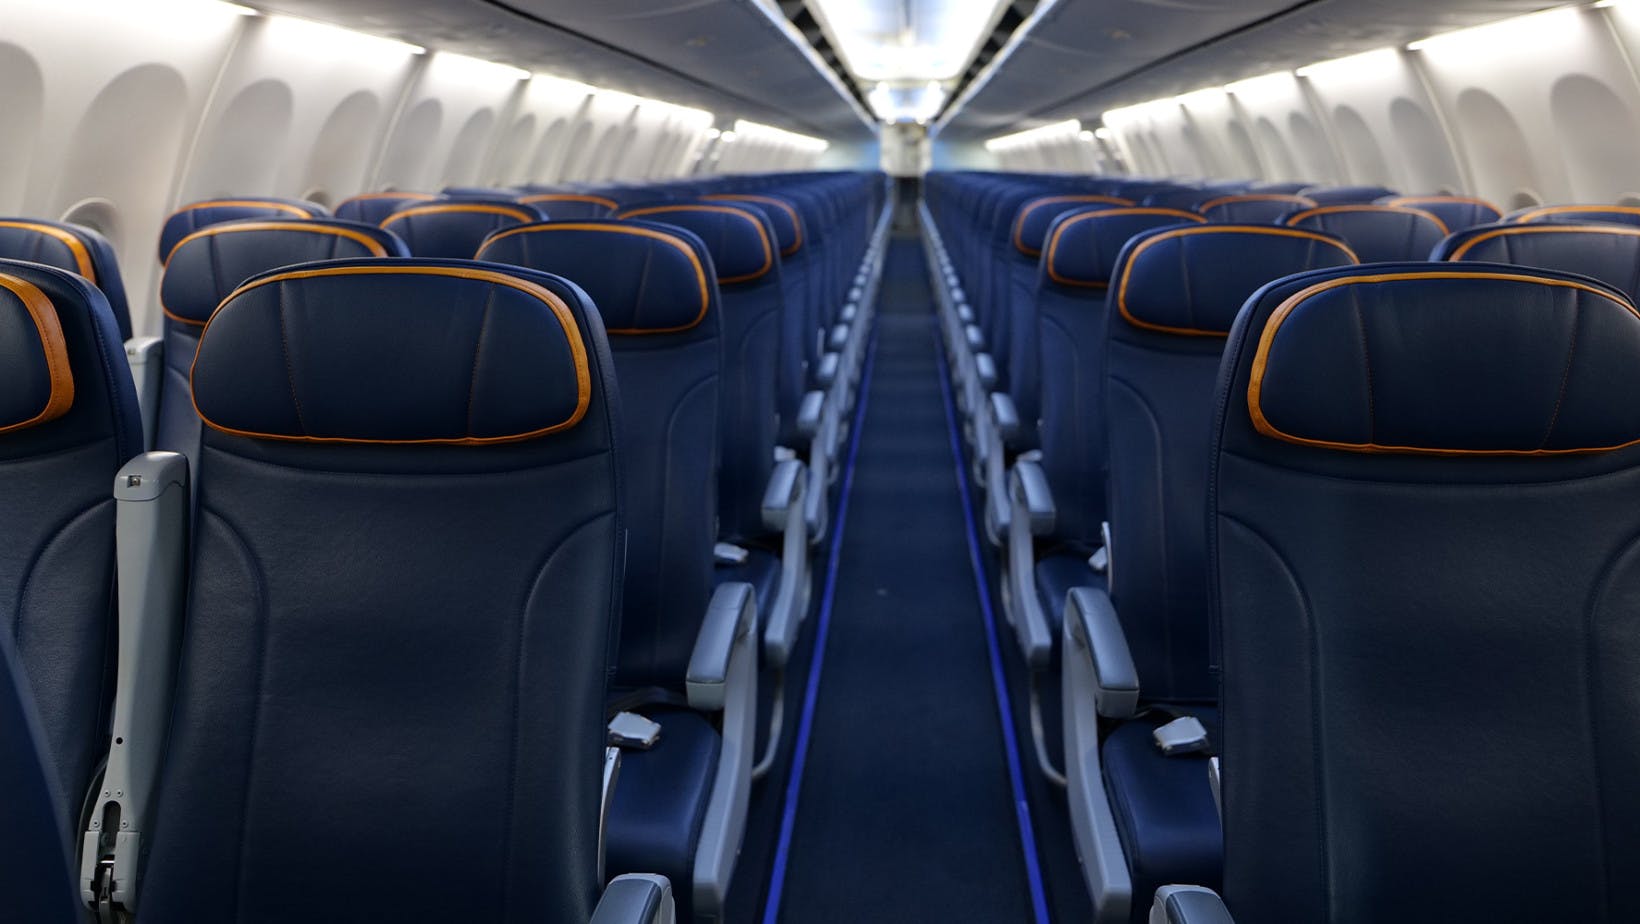 airline seating rows representing negative correlation meaning